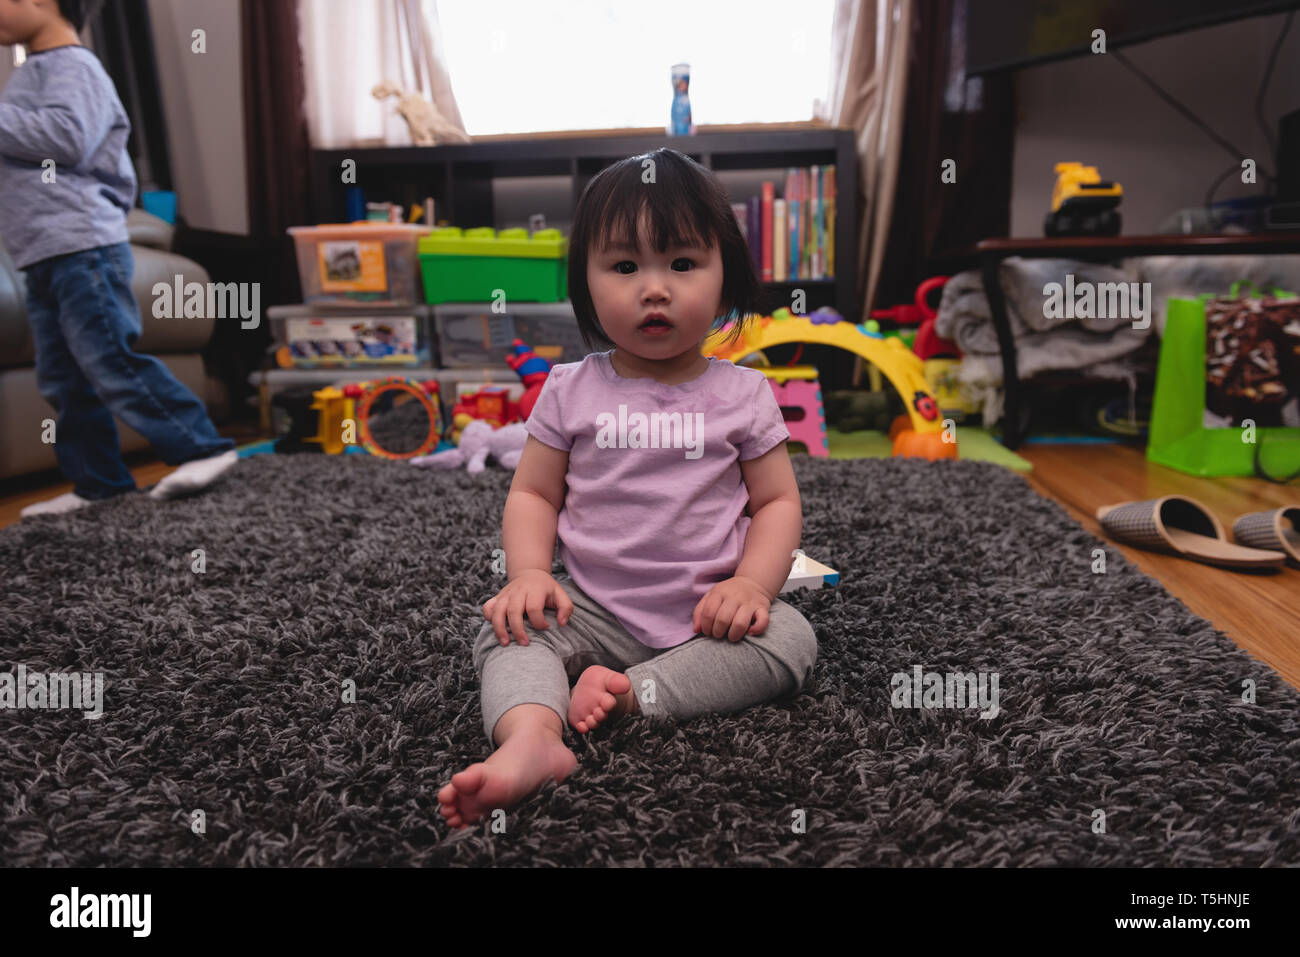 Small cute baby sitting on rug at home Stock Photo